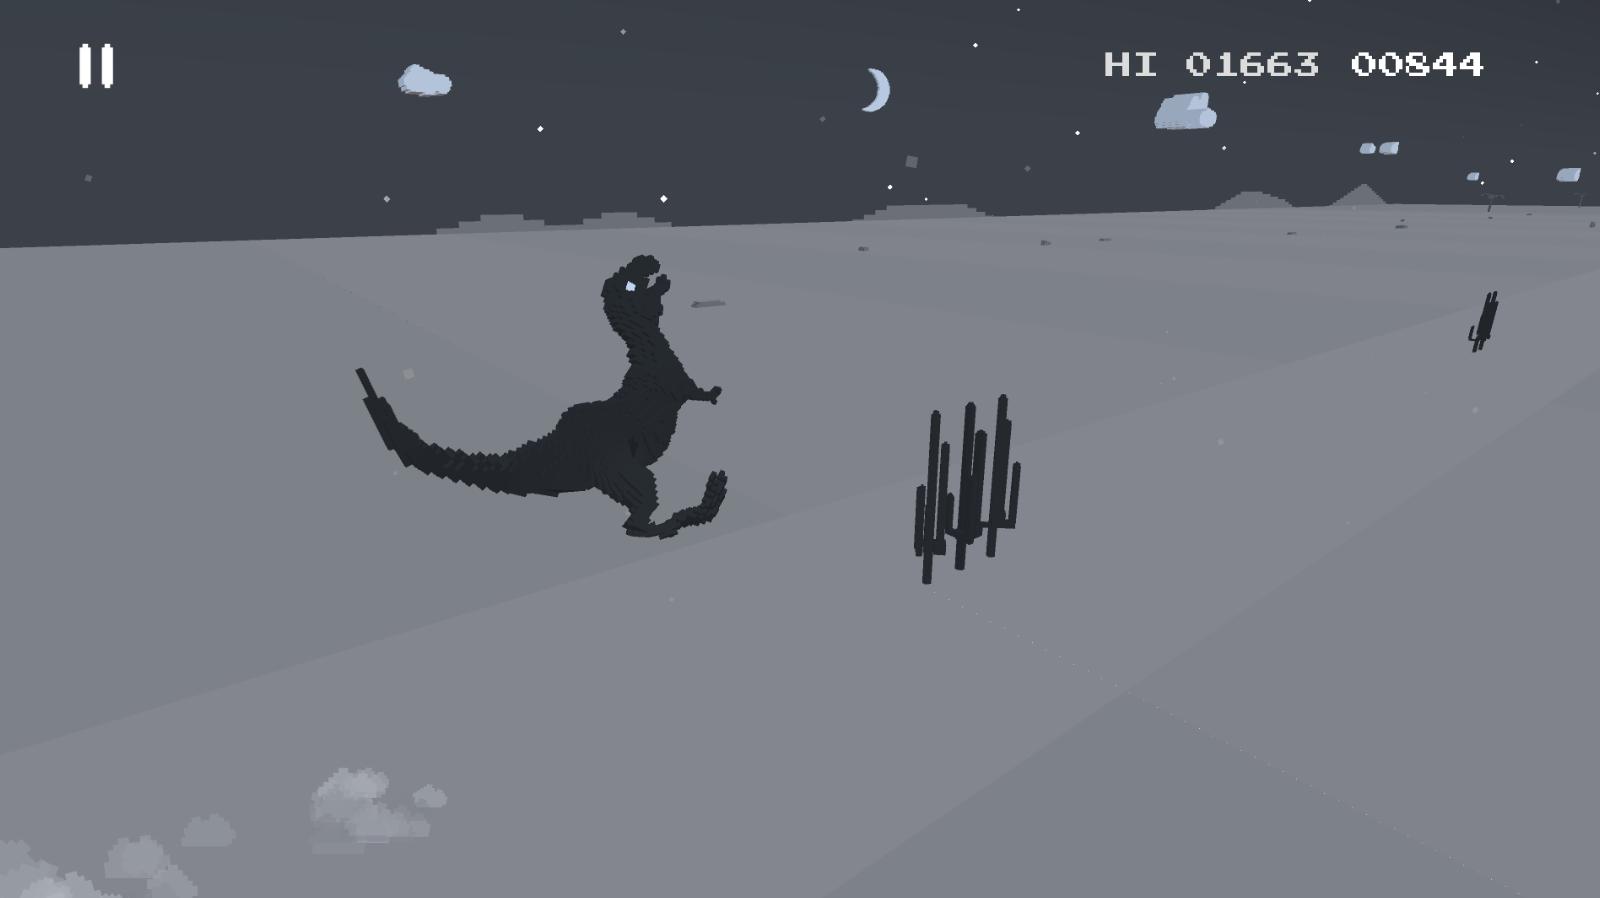 Now You Can Play the Chrome T-Rex Runner Game in 3D